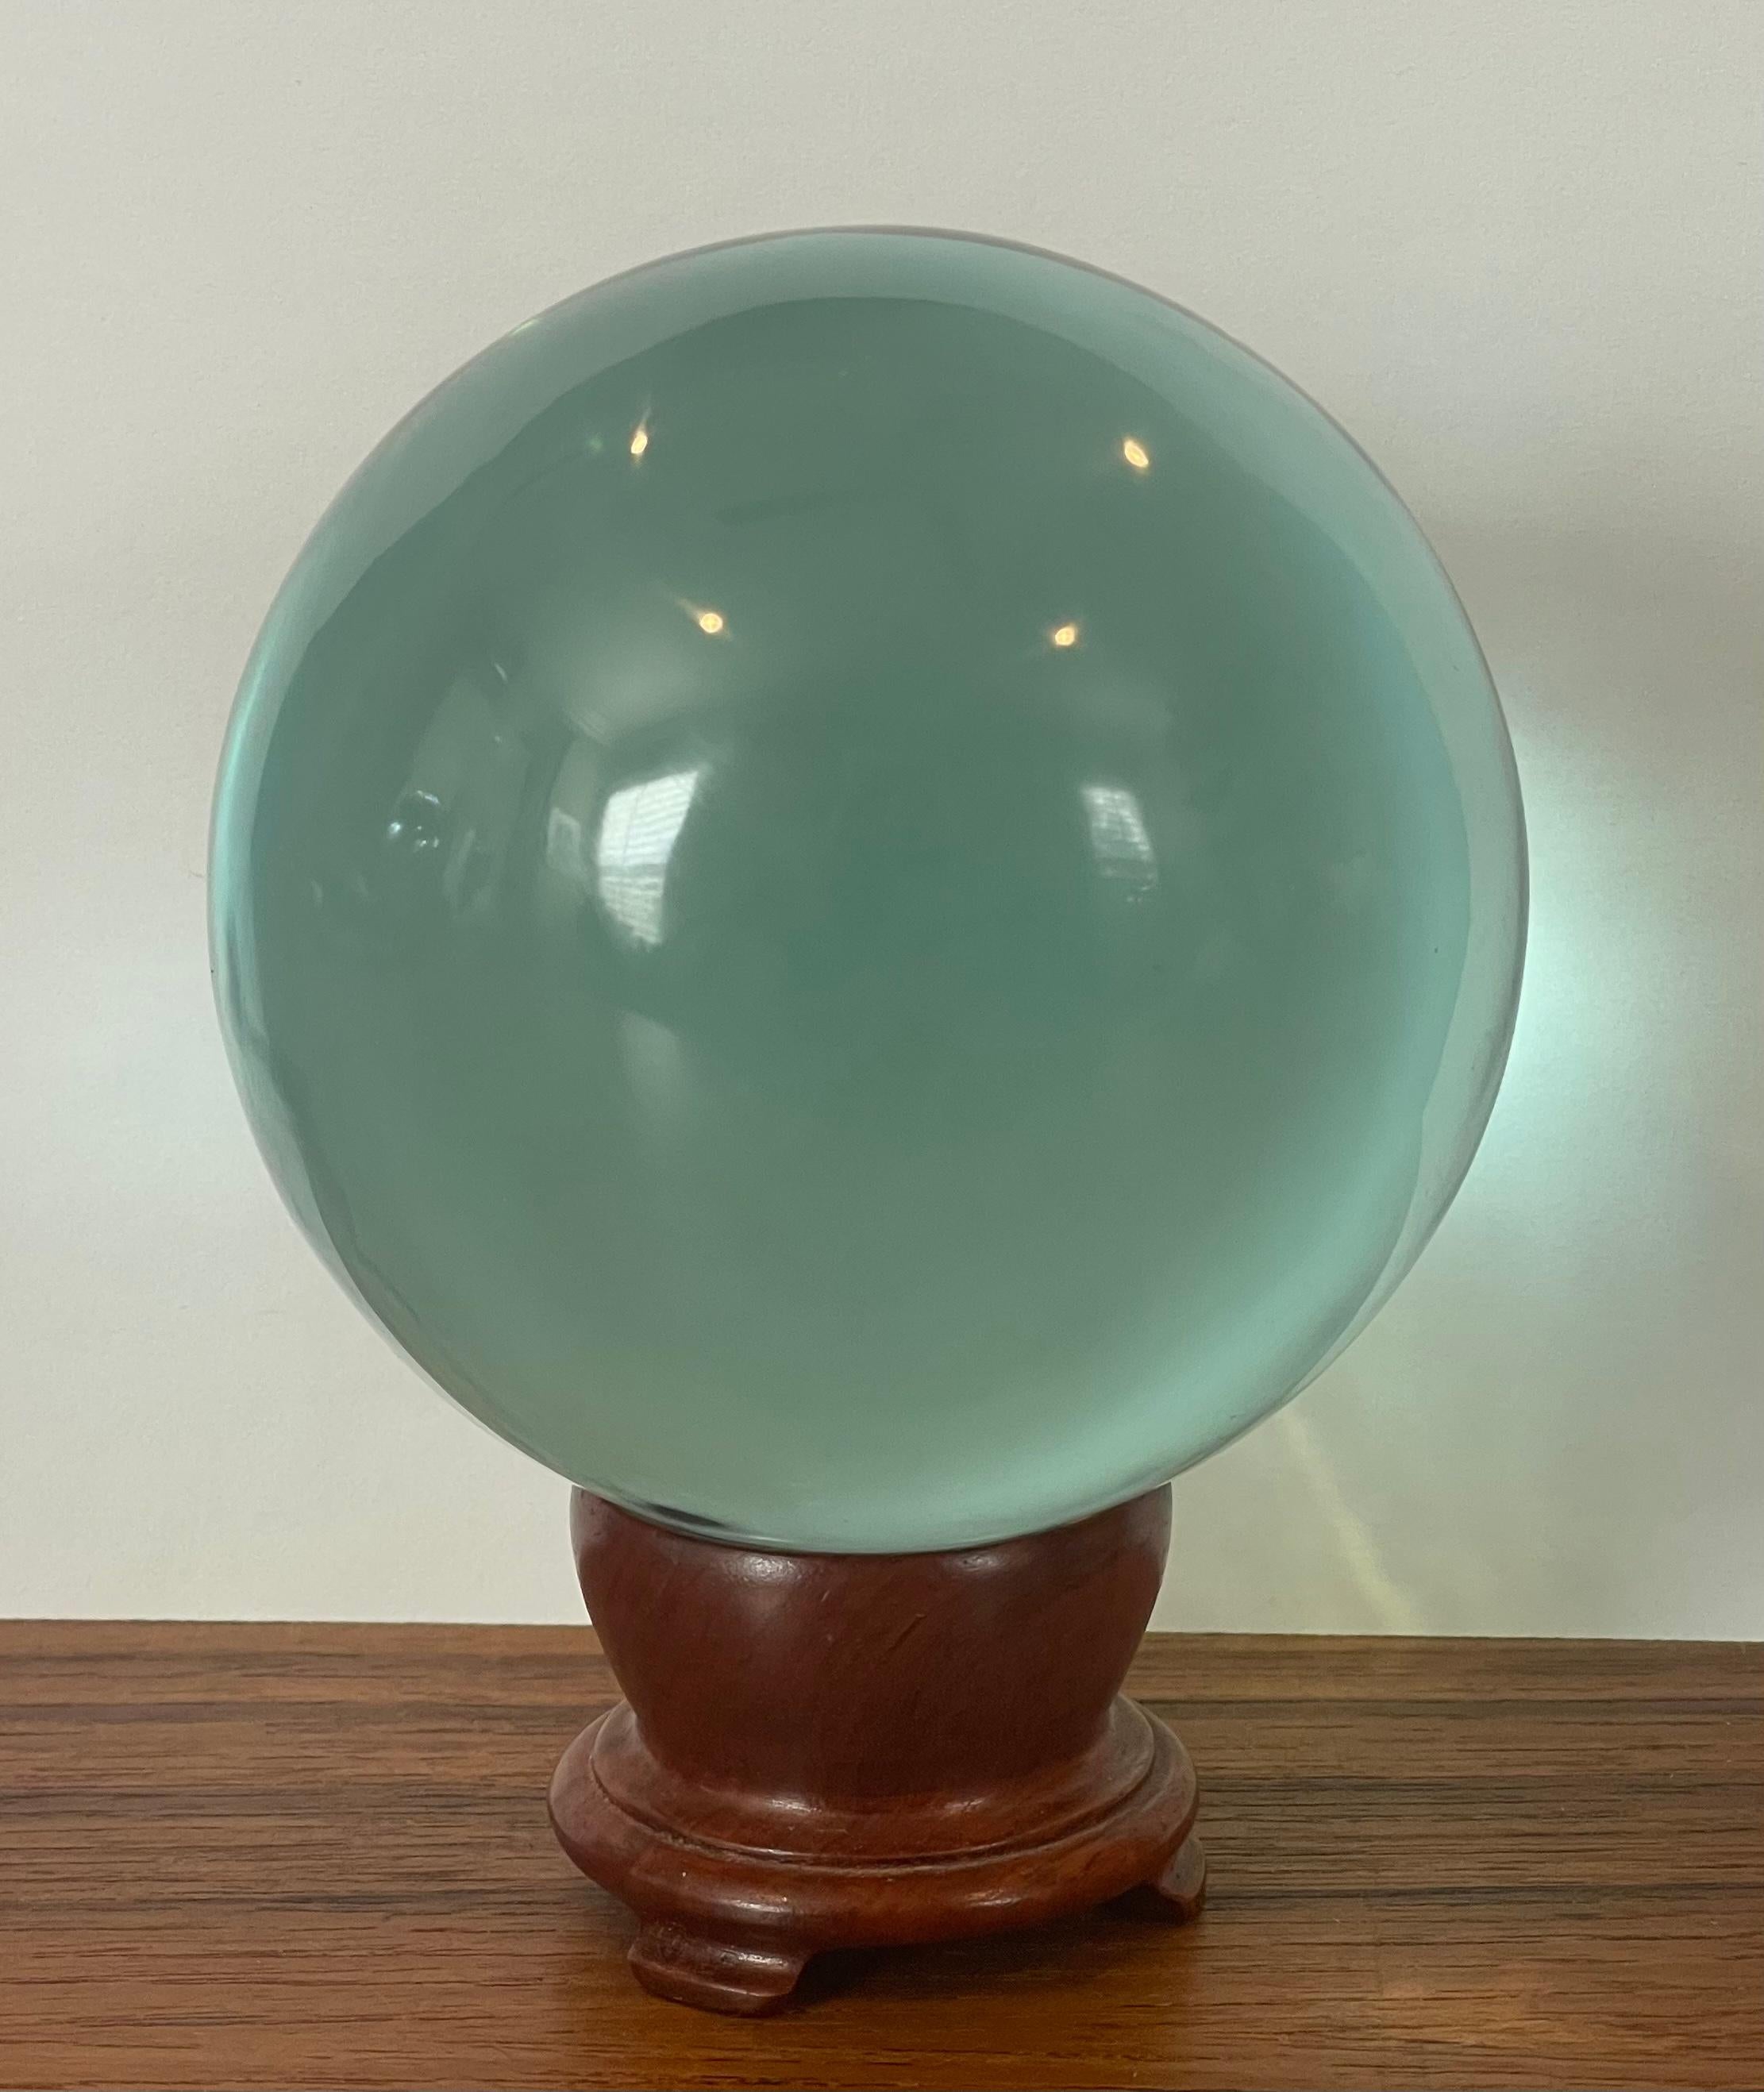 Aqua colored art Ggass orb sculpture on wooden stand, circa 1980s. The glass orb is in very good condition with no chips or cracks and measures 3